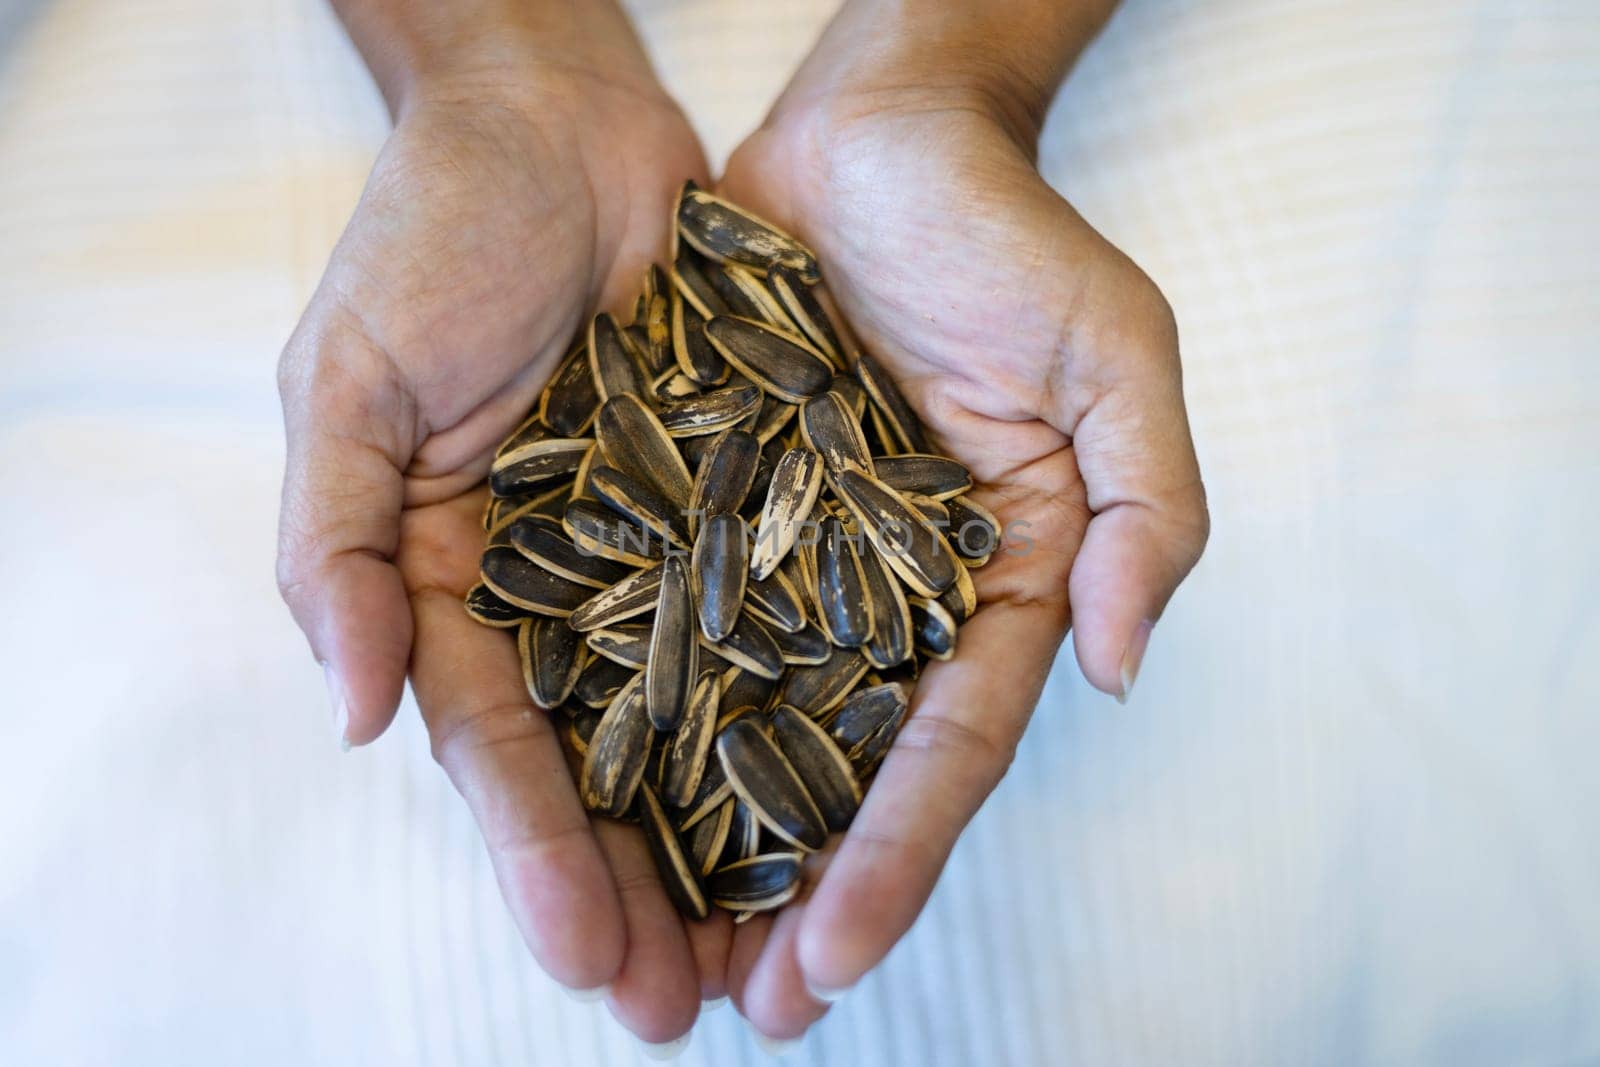 Handful of rich sunflower seeds. Close-up view of roasted sunflower seeds. Woman holding a pile of sunflower seeds.